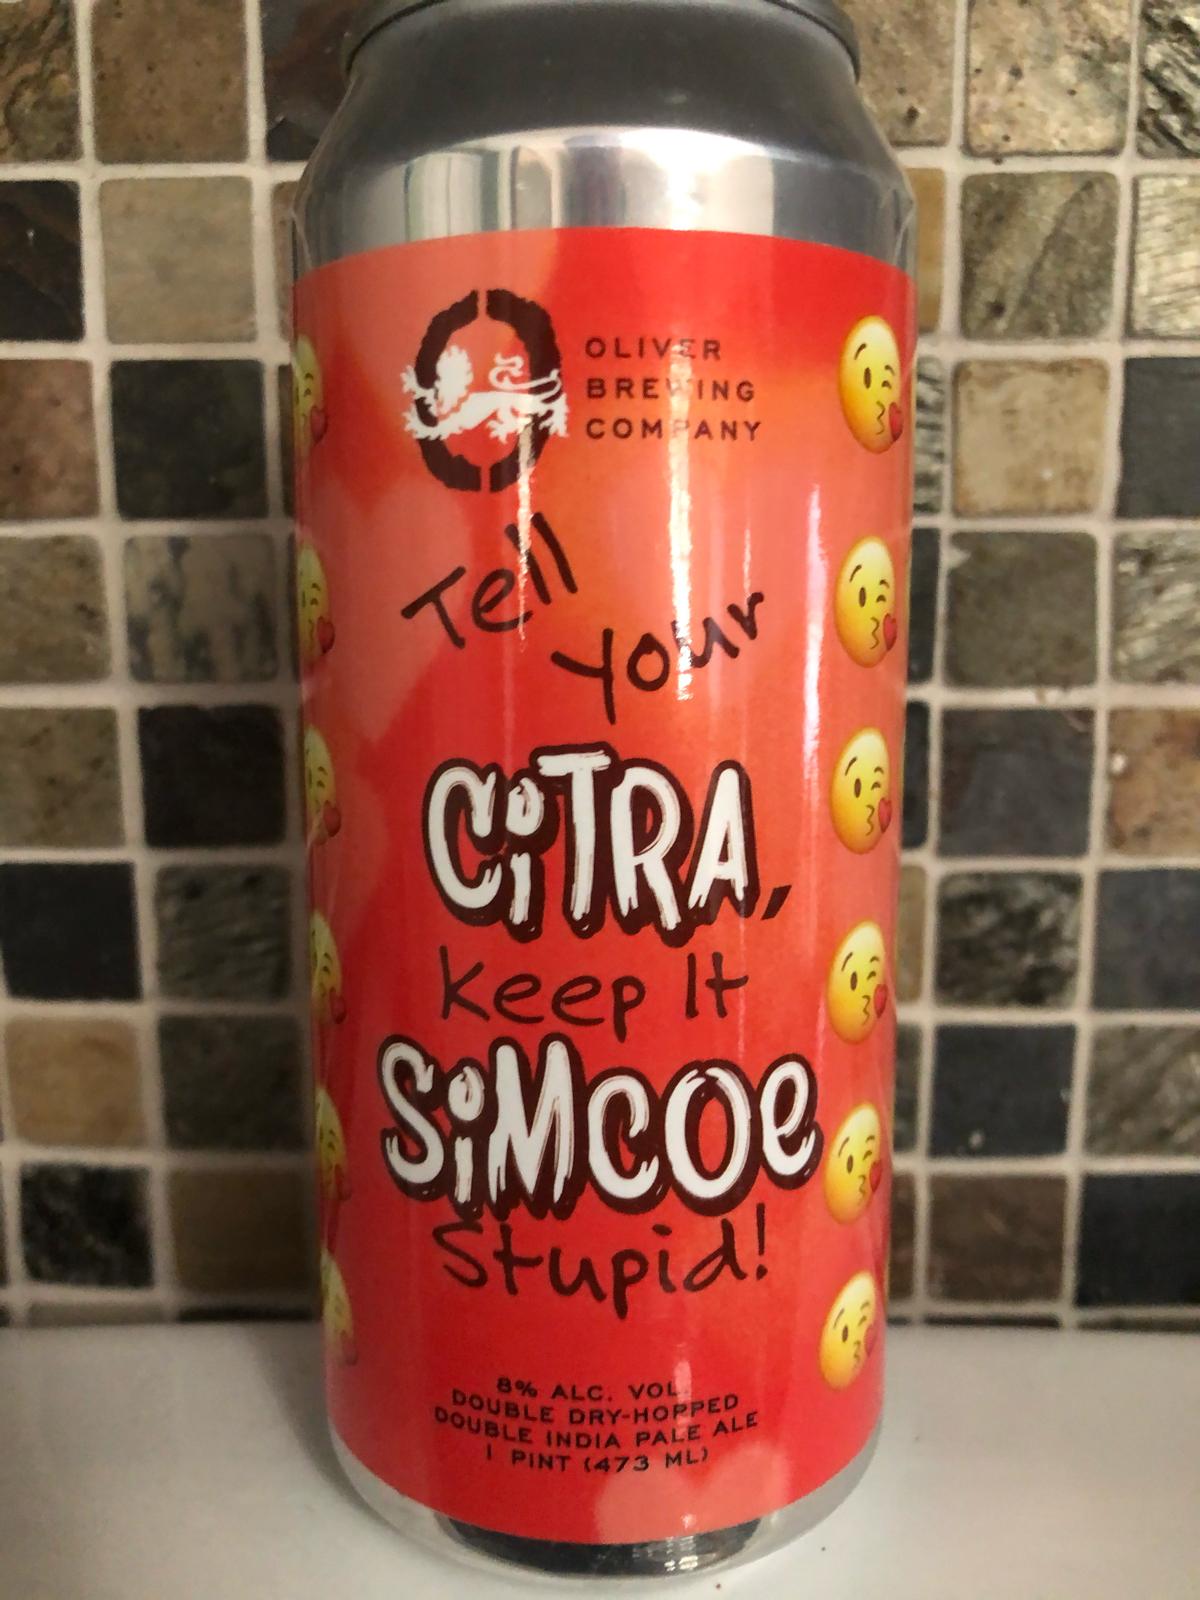 Tell Your Citra, Keep It Simcoe Stupid!